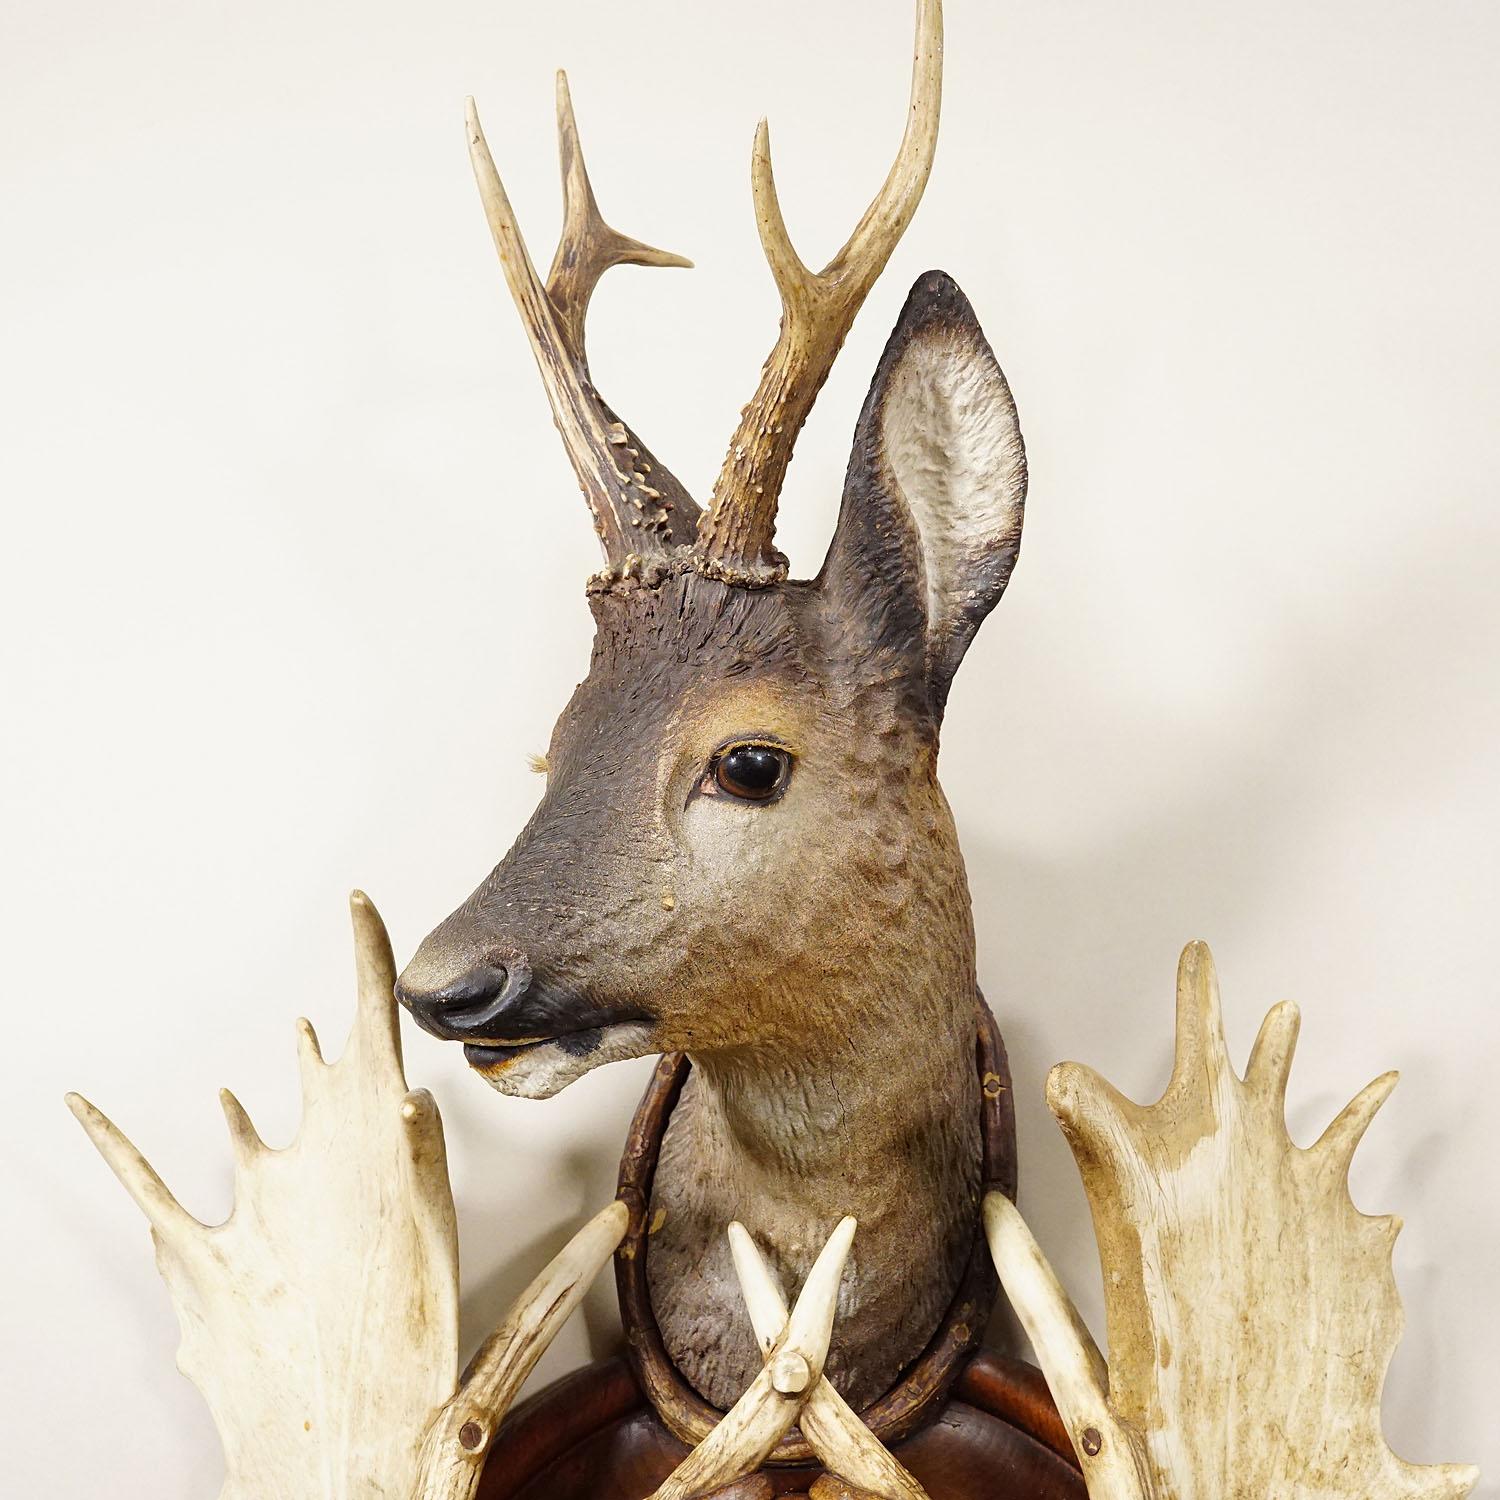 Carved Antique Cabin Antler Wall Clock with Deer Head Austria ca. 1900 For Sale